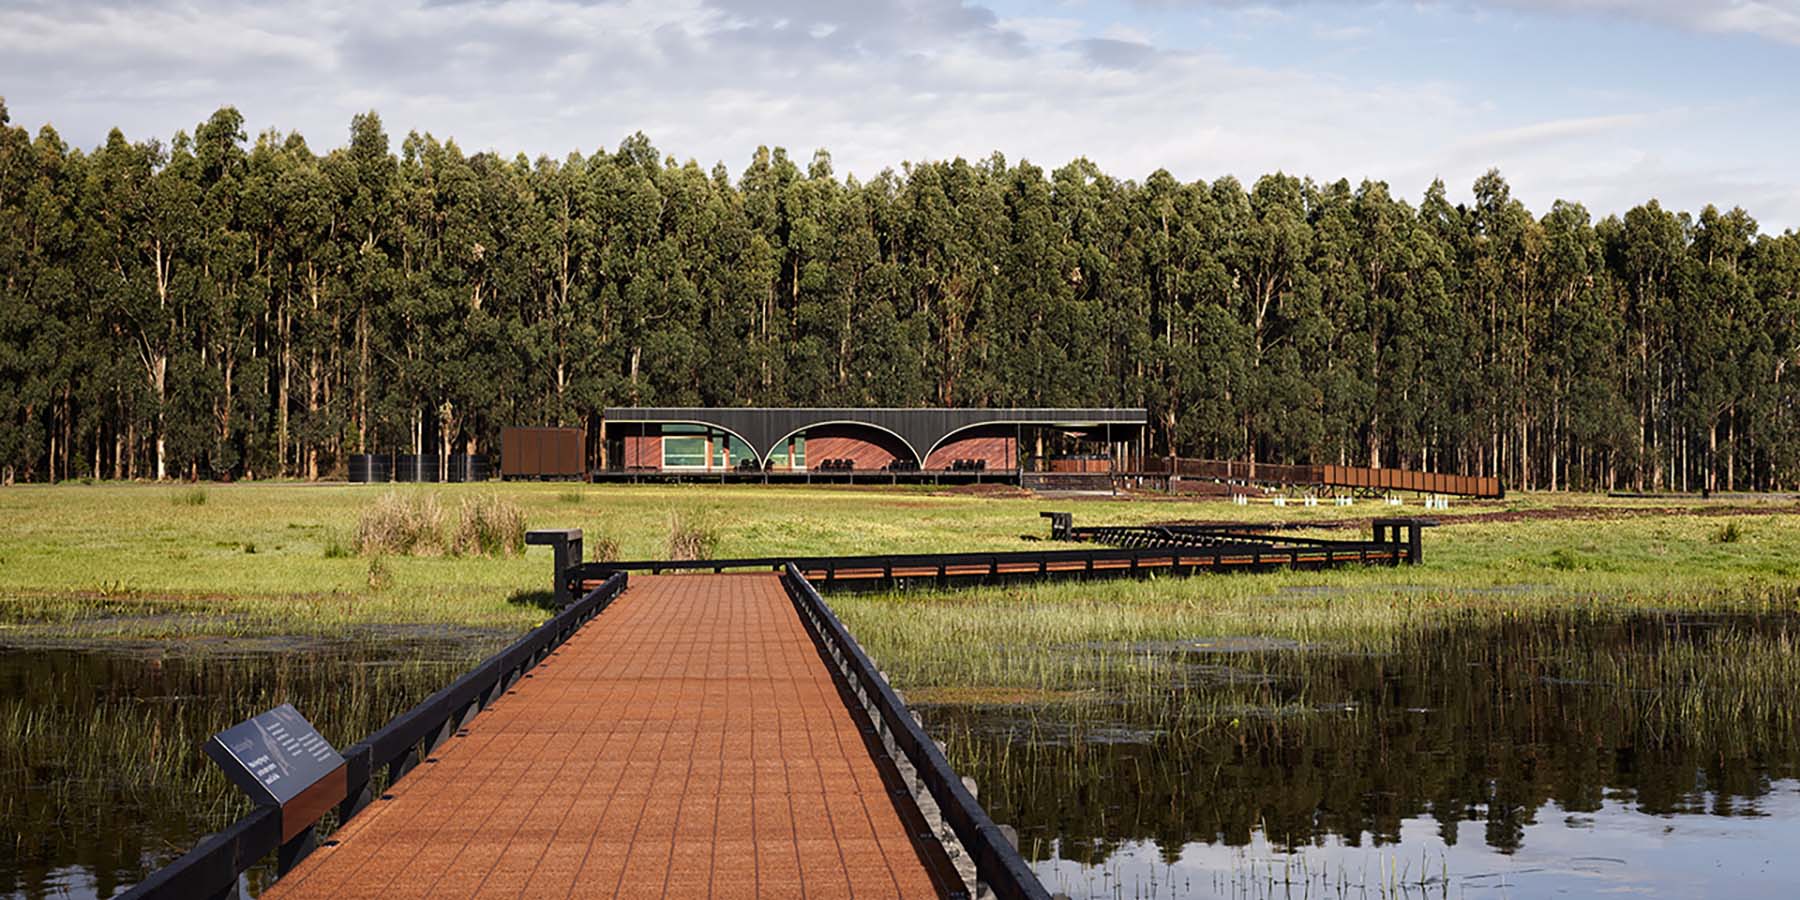 Tae Rak Aquaculture Centre and its red gum facade set behind charred timber arches, with the jetty and lake in foreground.